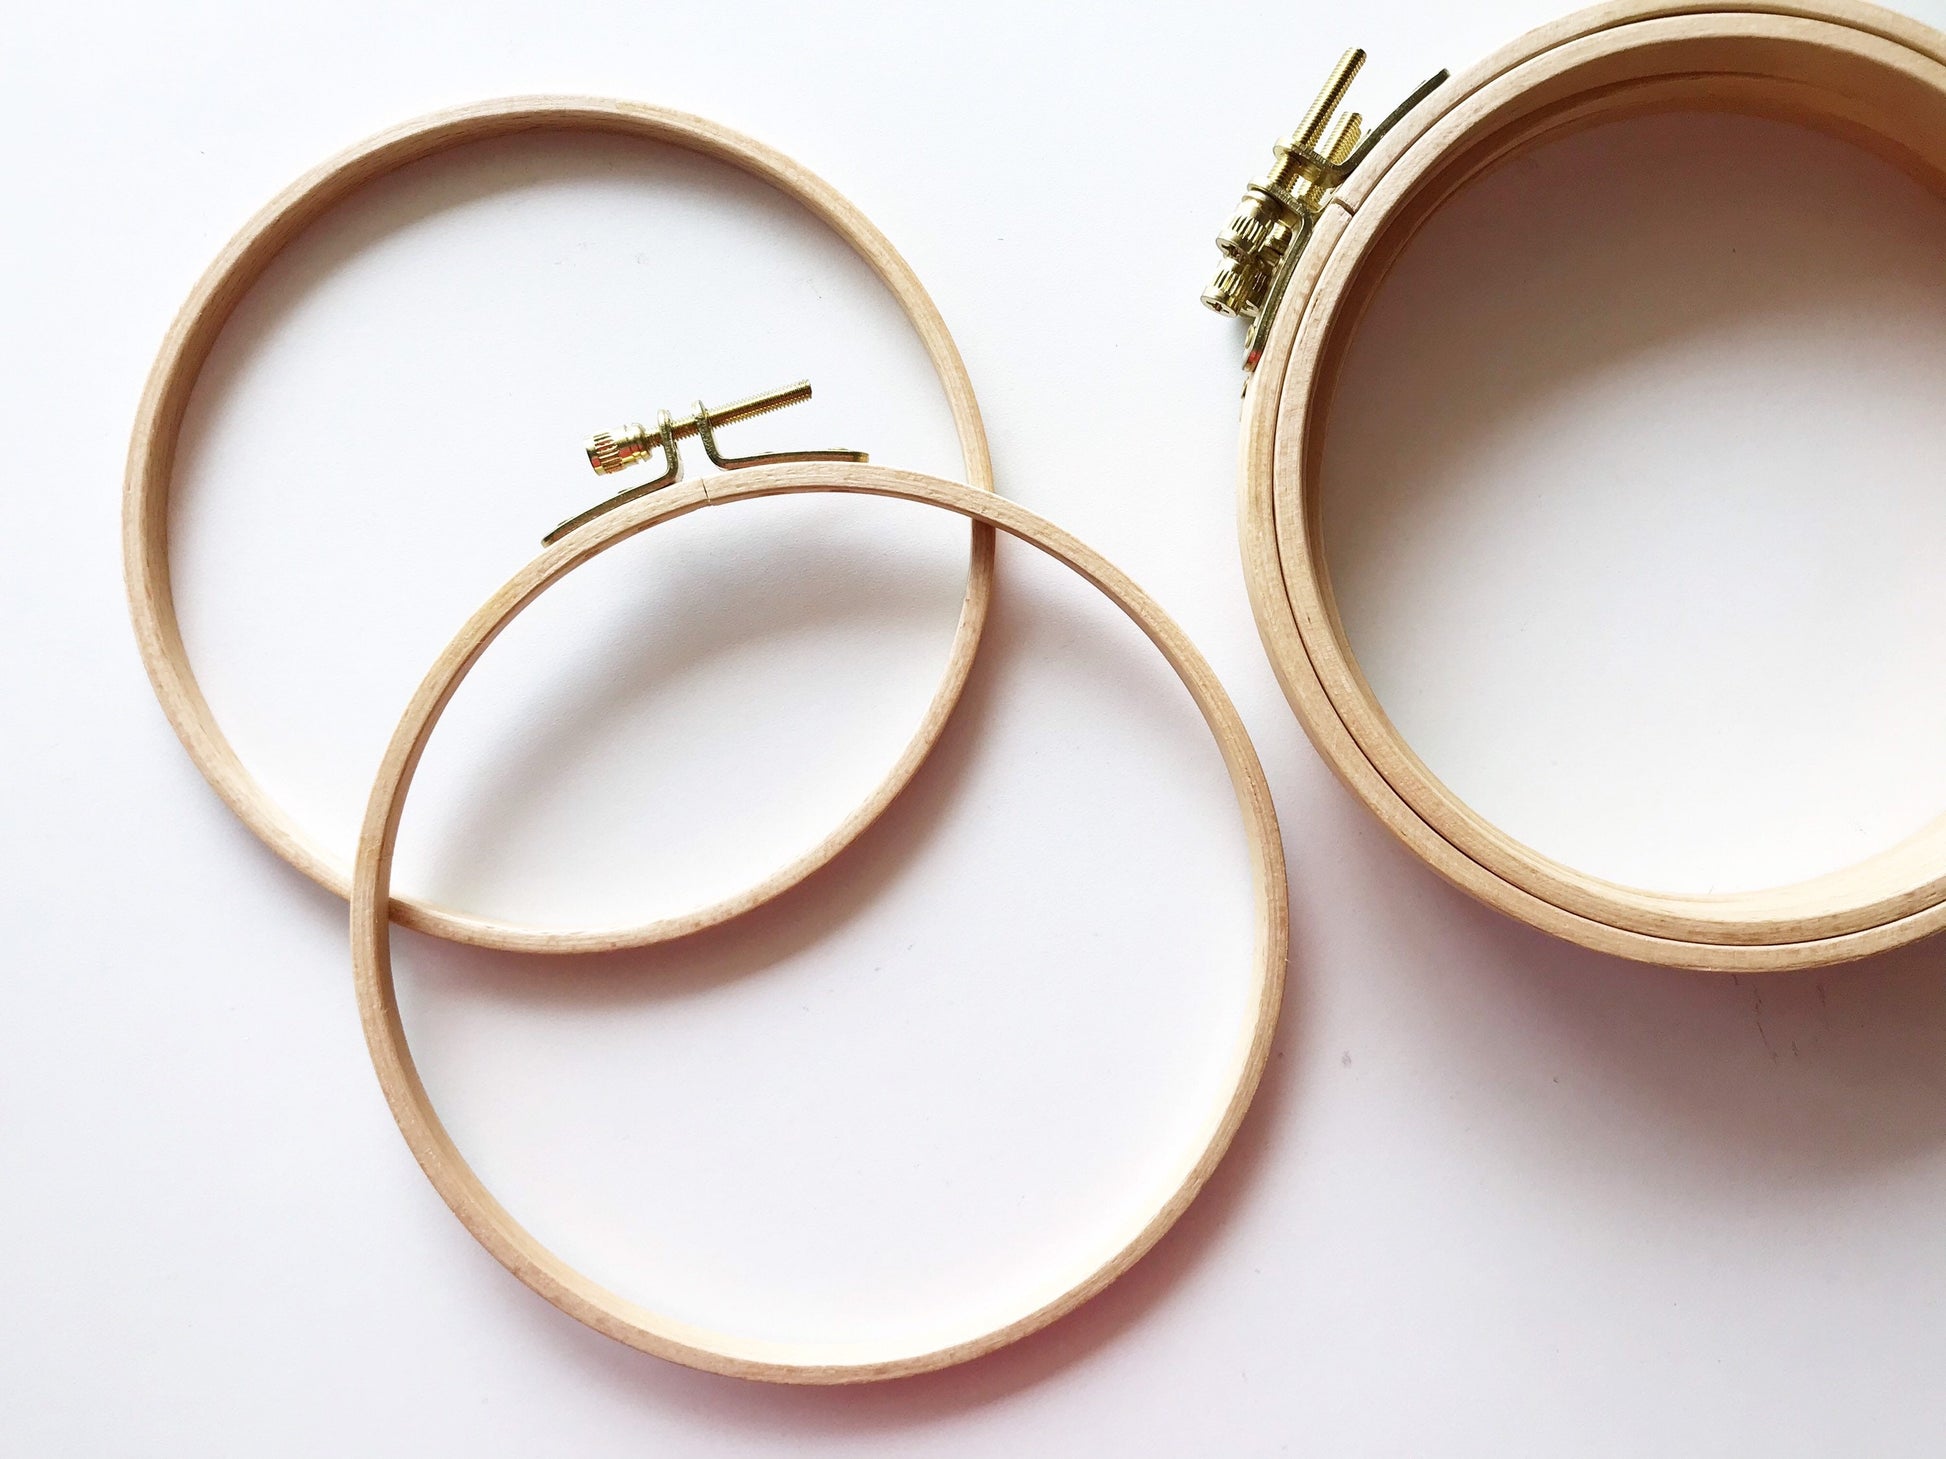 Beech Wood Embroidery Hoop, 2 Packs 6 inch Cross Stitch Hoops, Round Splinters Free for Art Craft Sewing and Embroidery Hoop Decorative Hanging